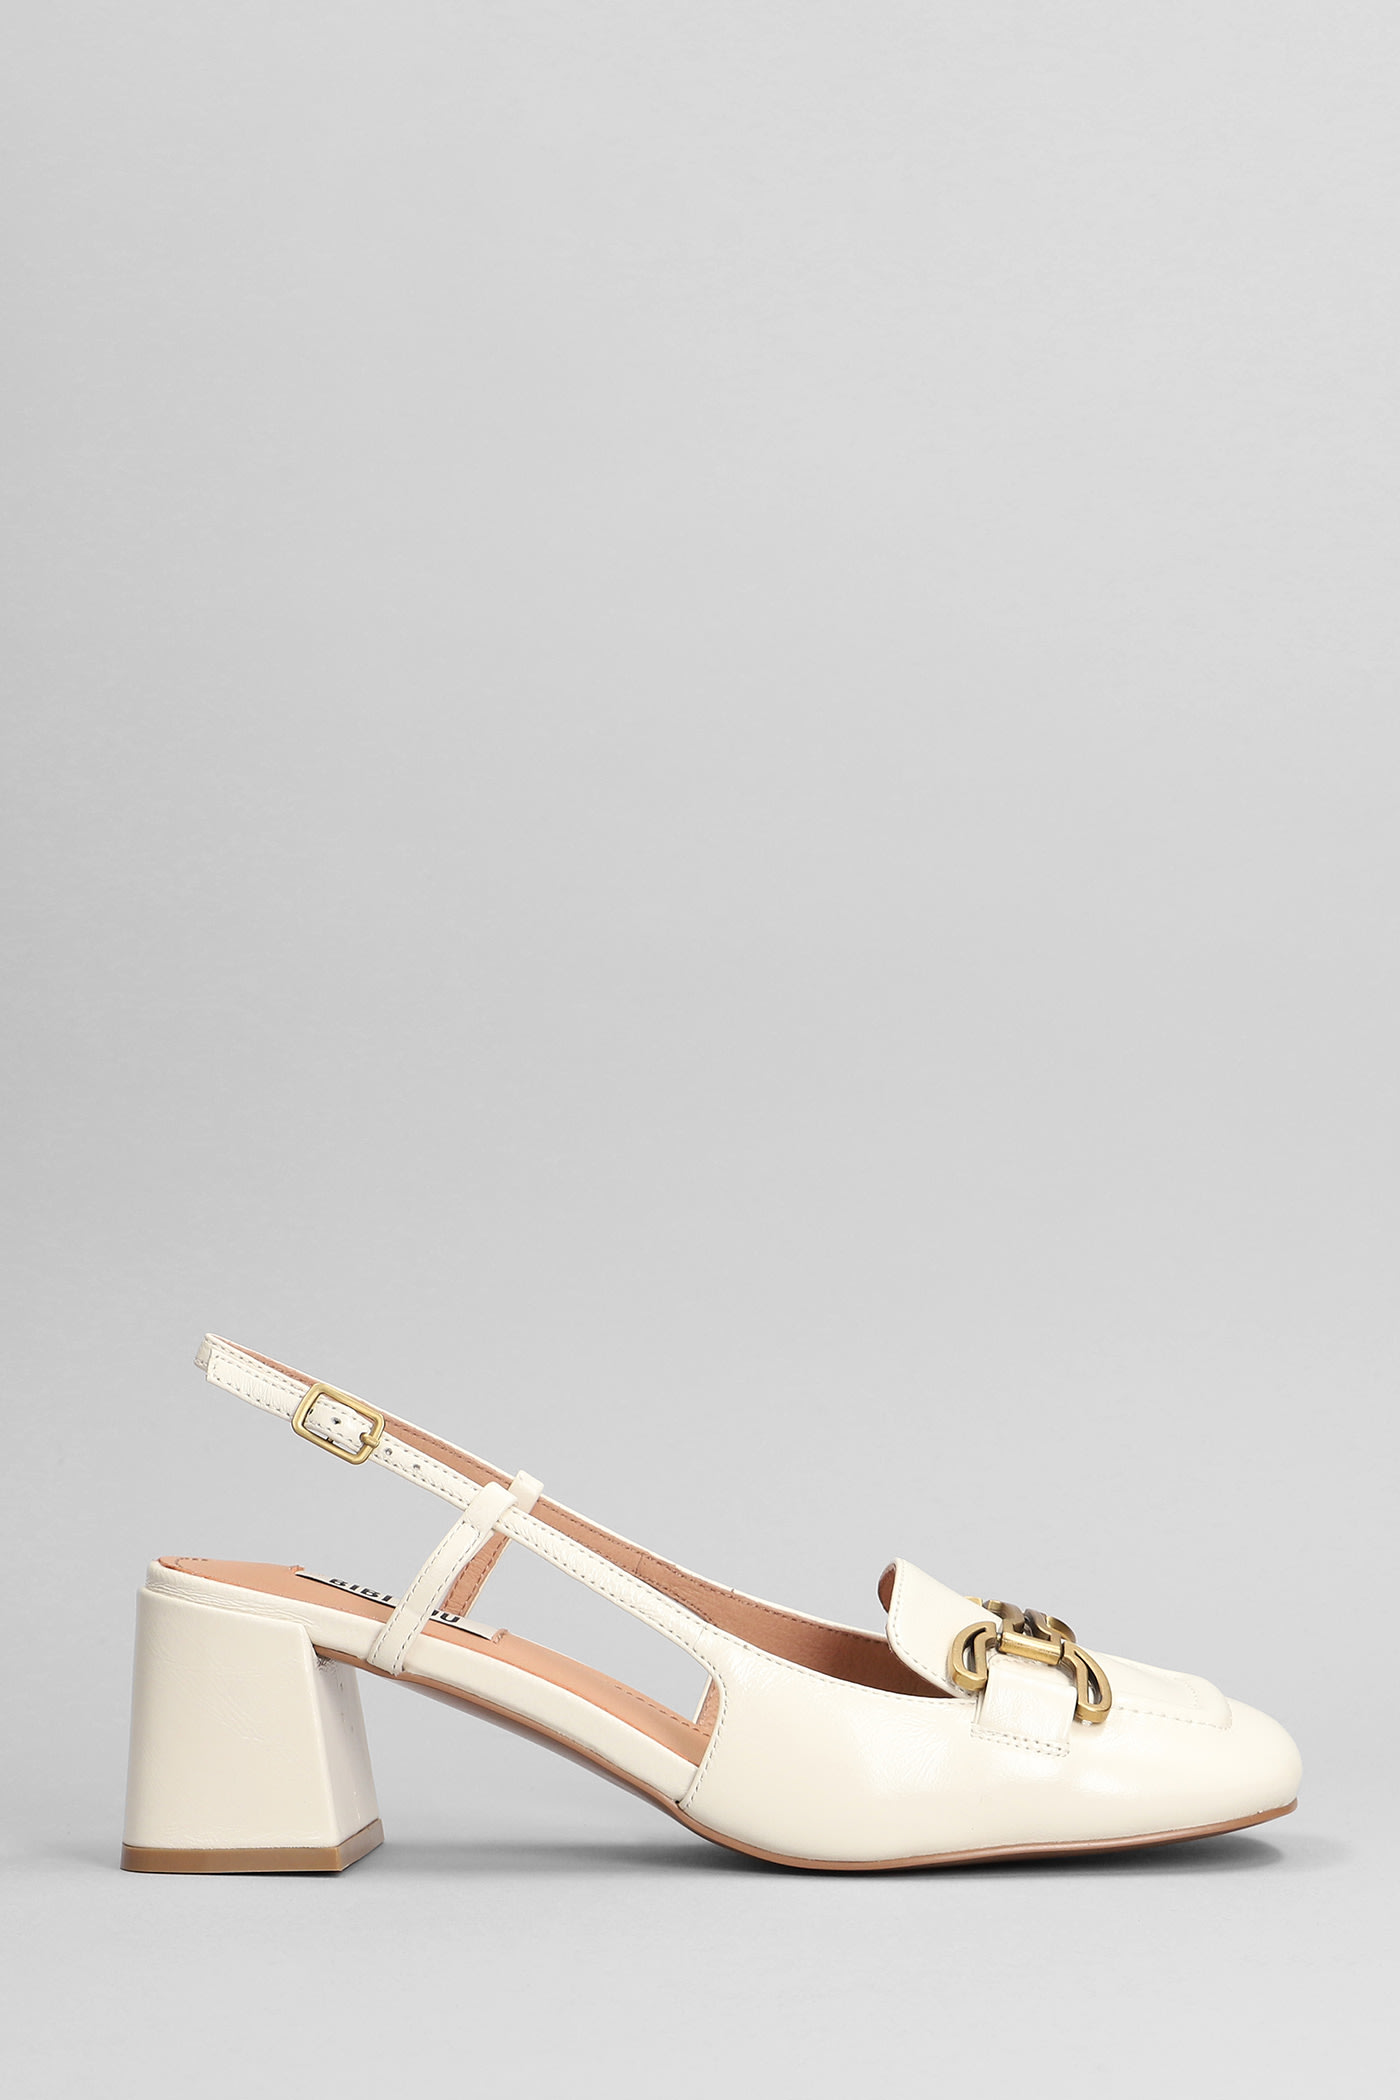 Renee 60 Pumps In White Leather